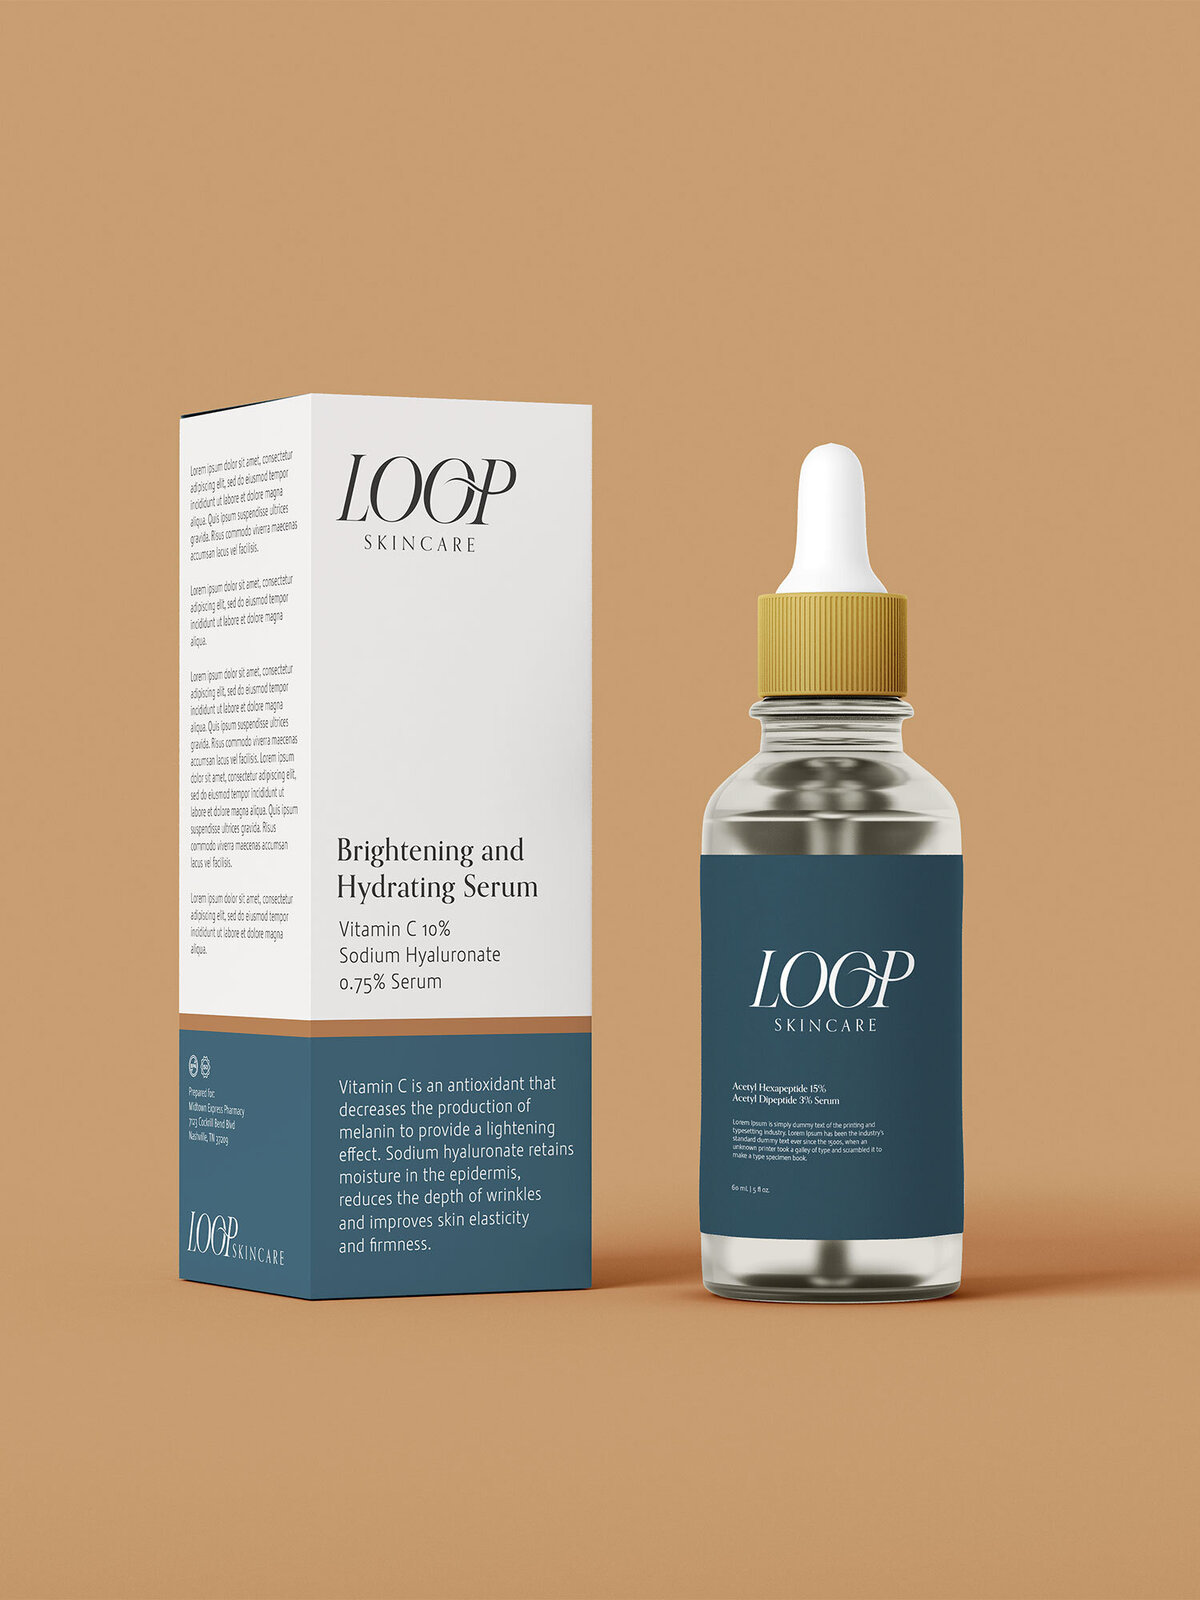 A mockup of product packaging for Loop Skincare